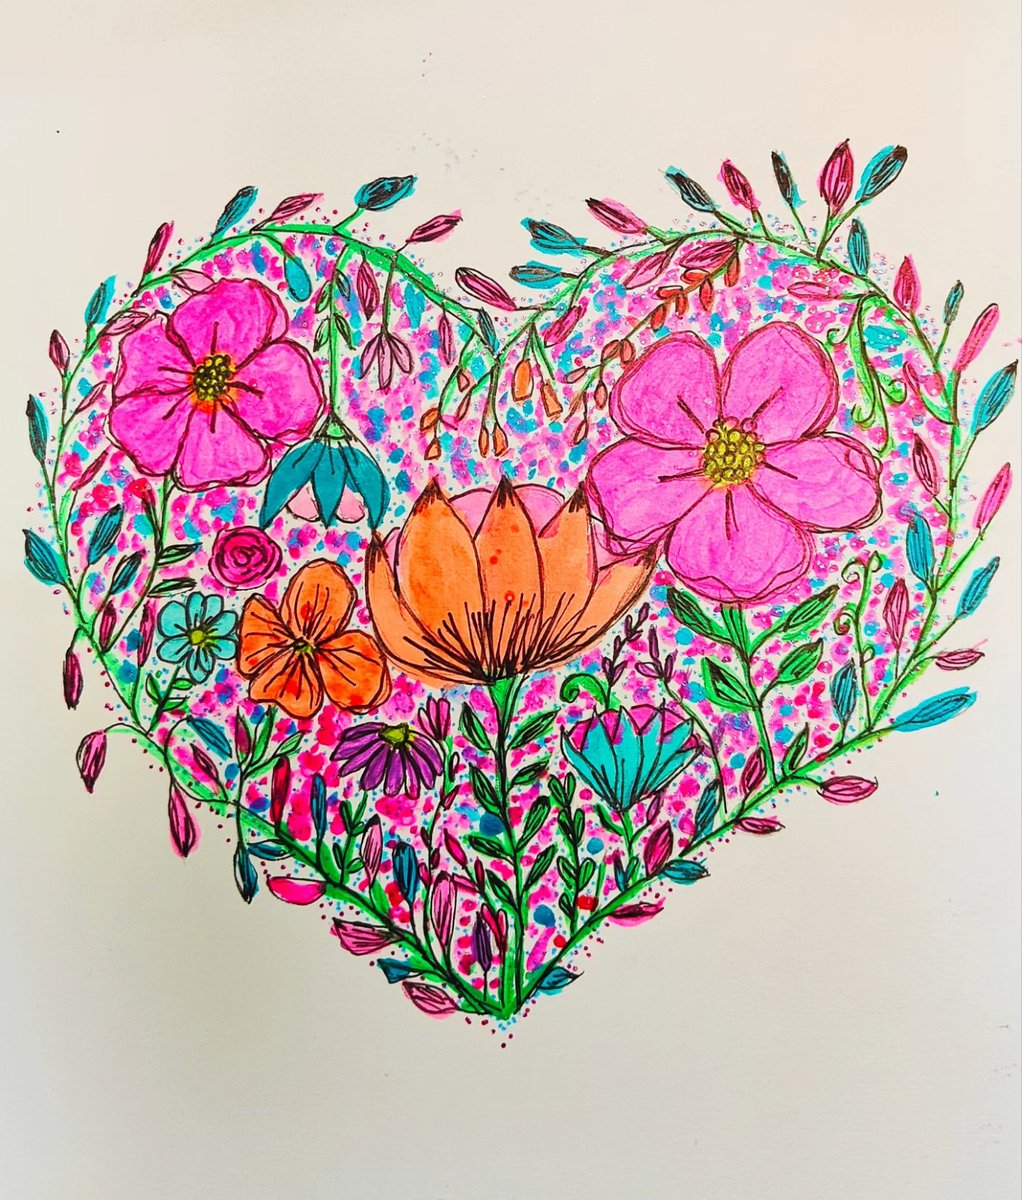 Acrylic ink and liner! #art #artist #artwork #draw #drawing #liner #fineliner #pretty #artwork #watercolour #painting #floral #flowers #ink #acrylicink #colourful